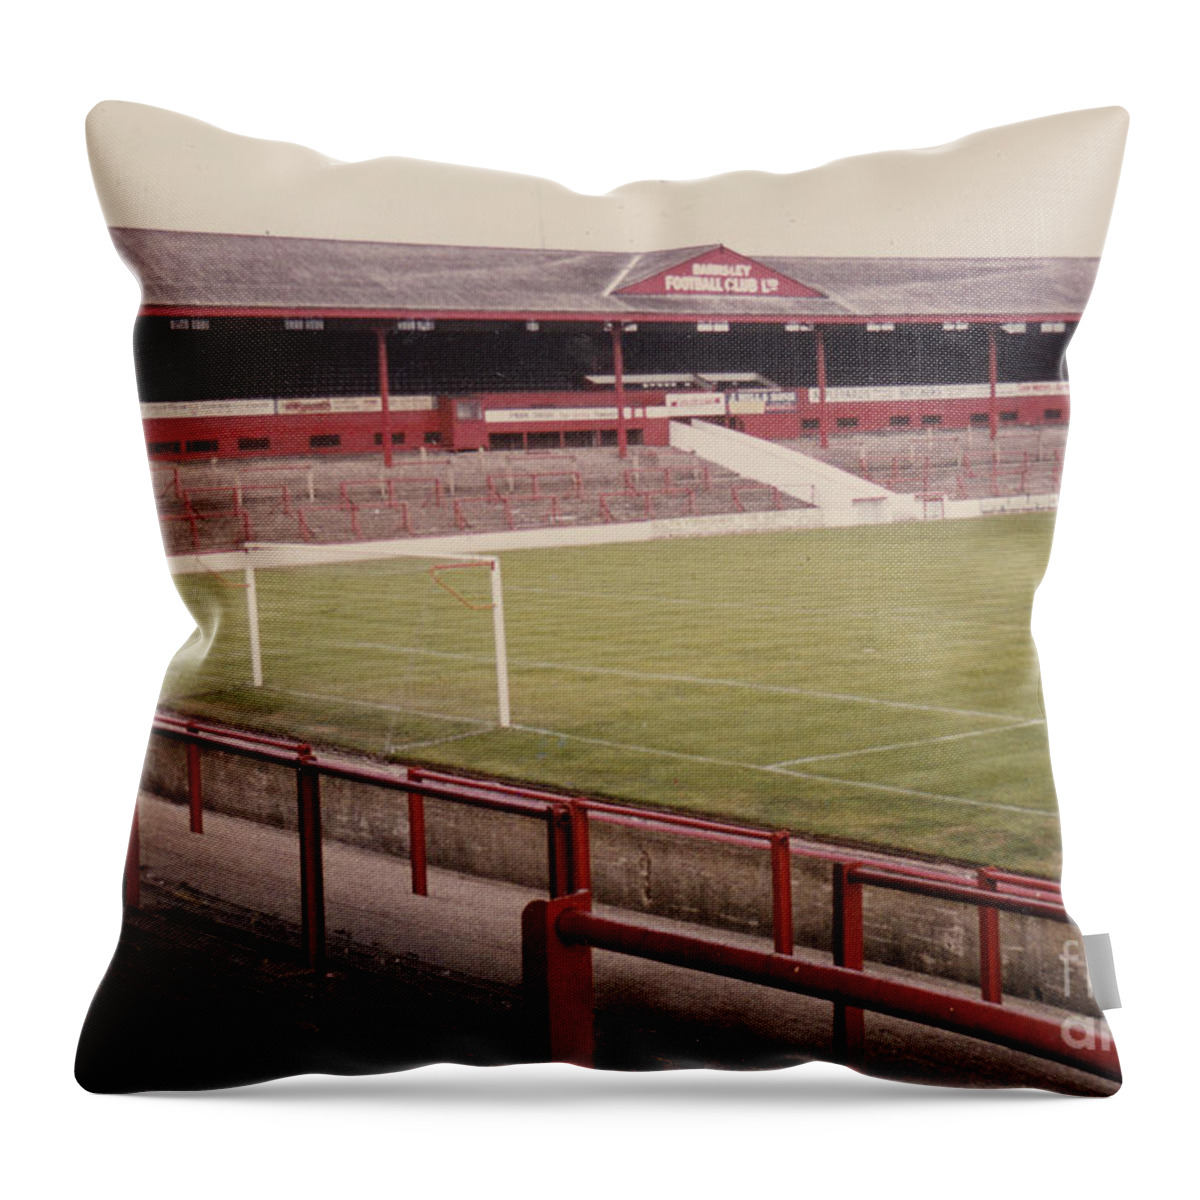  Throw Pillow featuring the photograph Barnsley - Oakwell Stadium - West Stand 1 - 1970s by Legendary Football Grounds